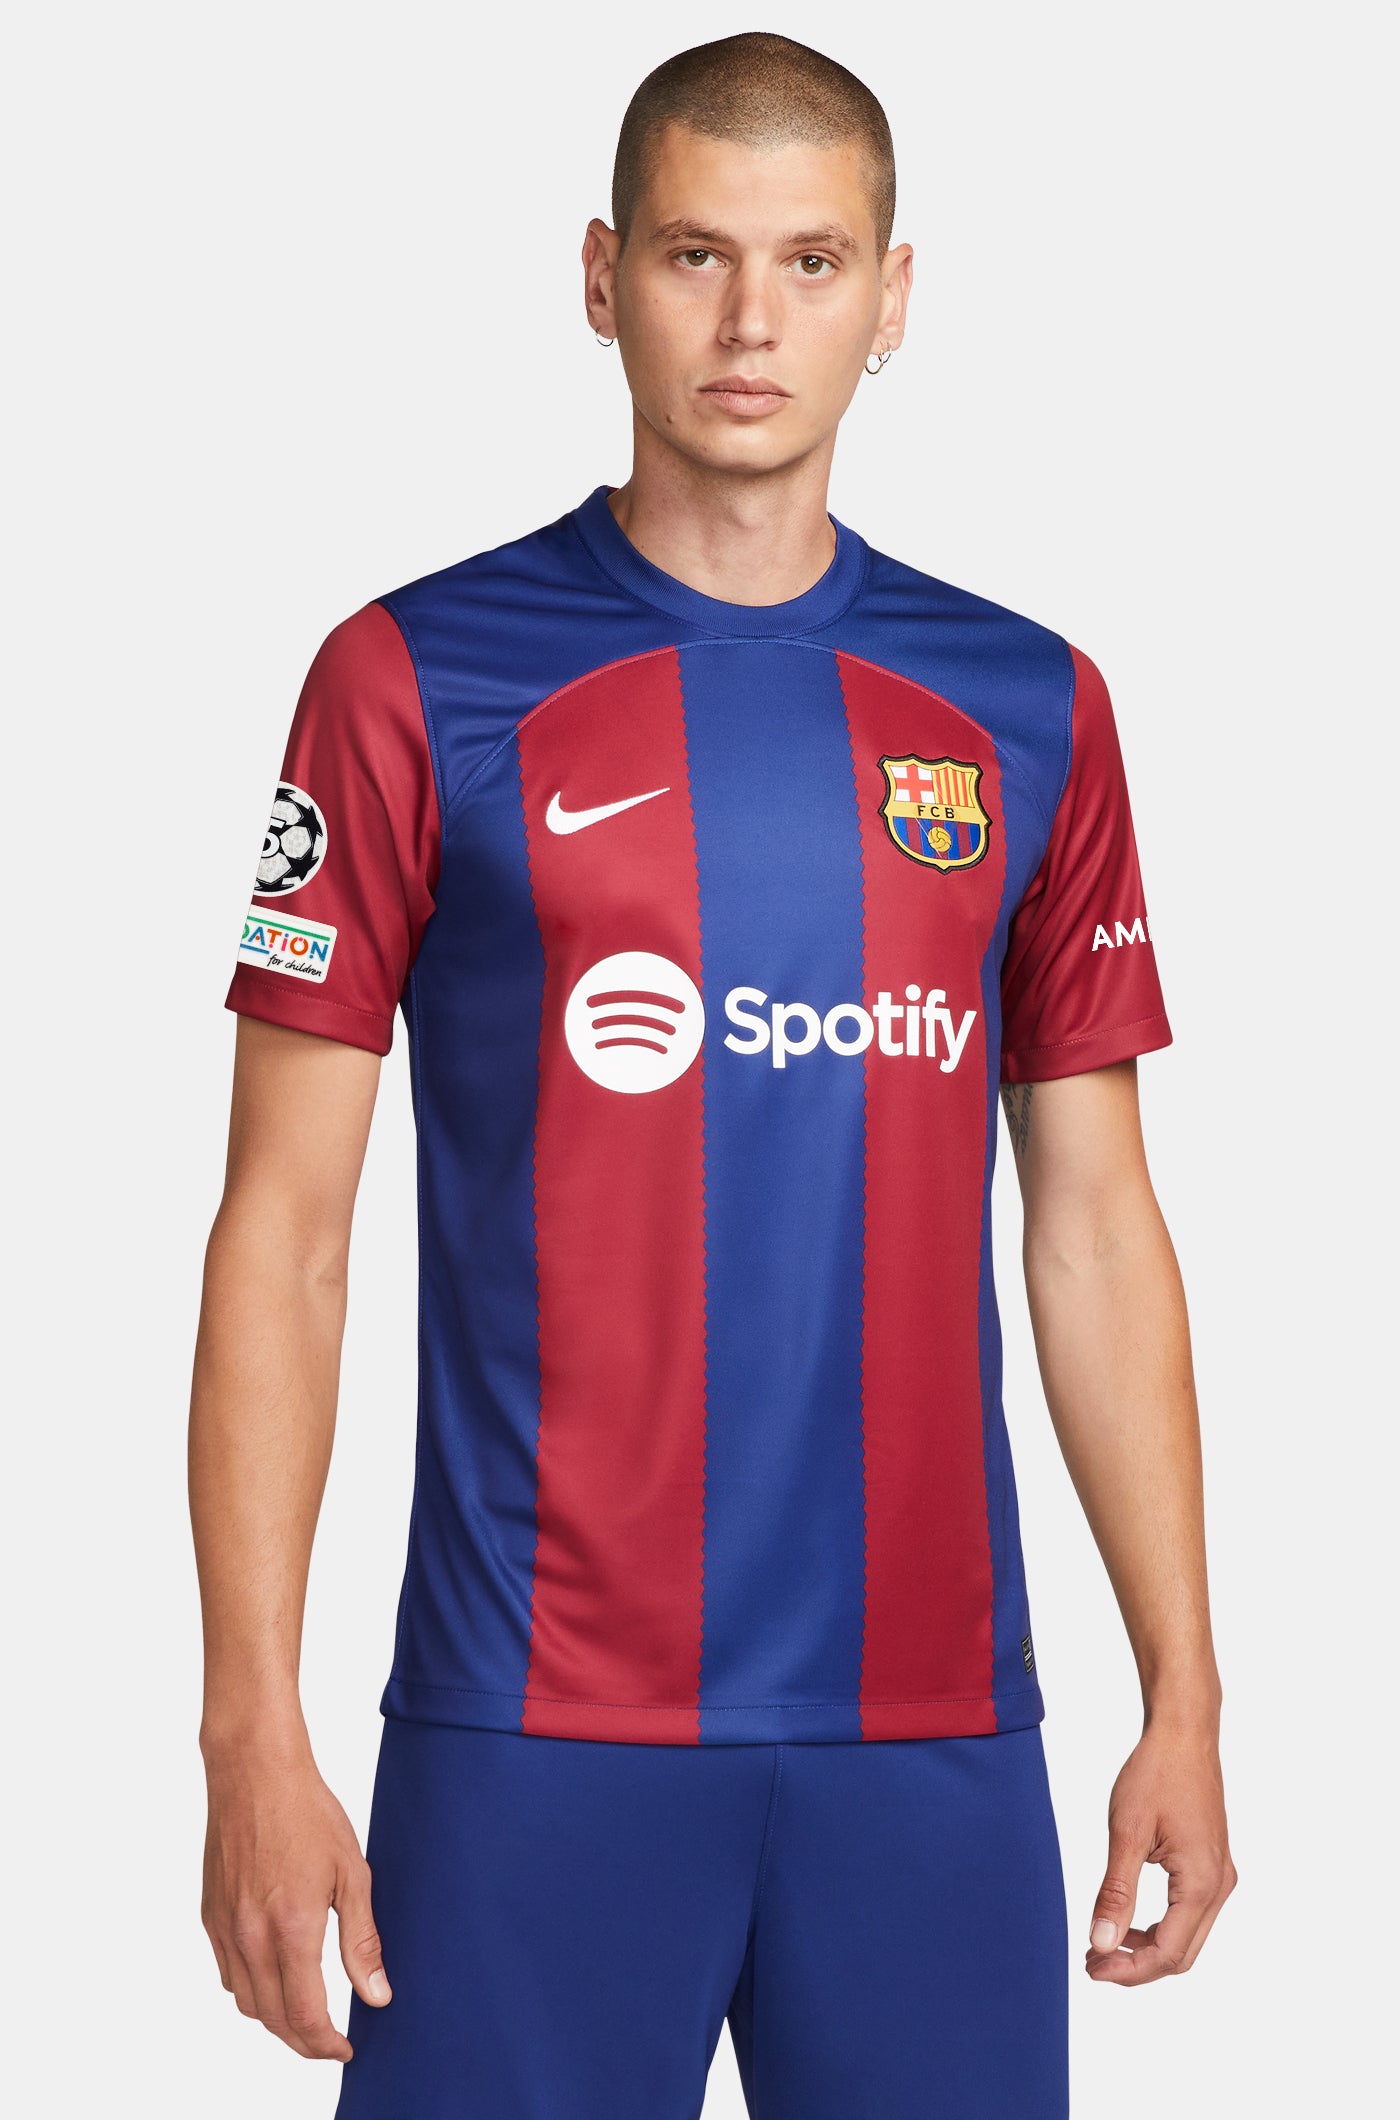 UCL FC Barcelona home shirt 23/24 - VITOR ROQUE